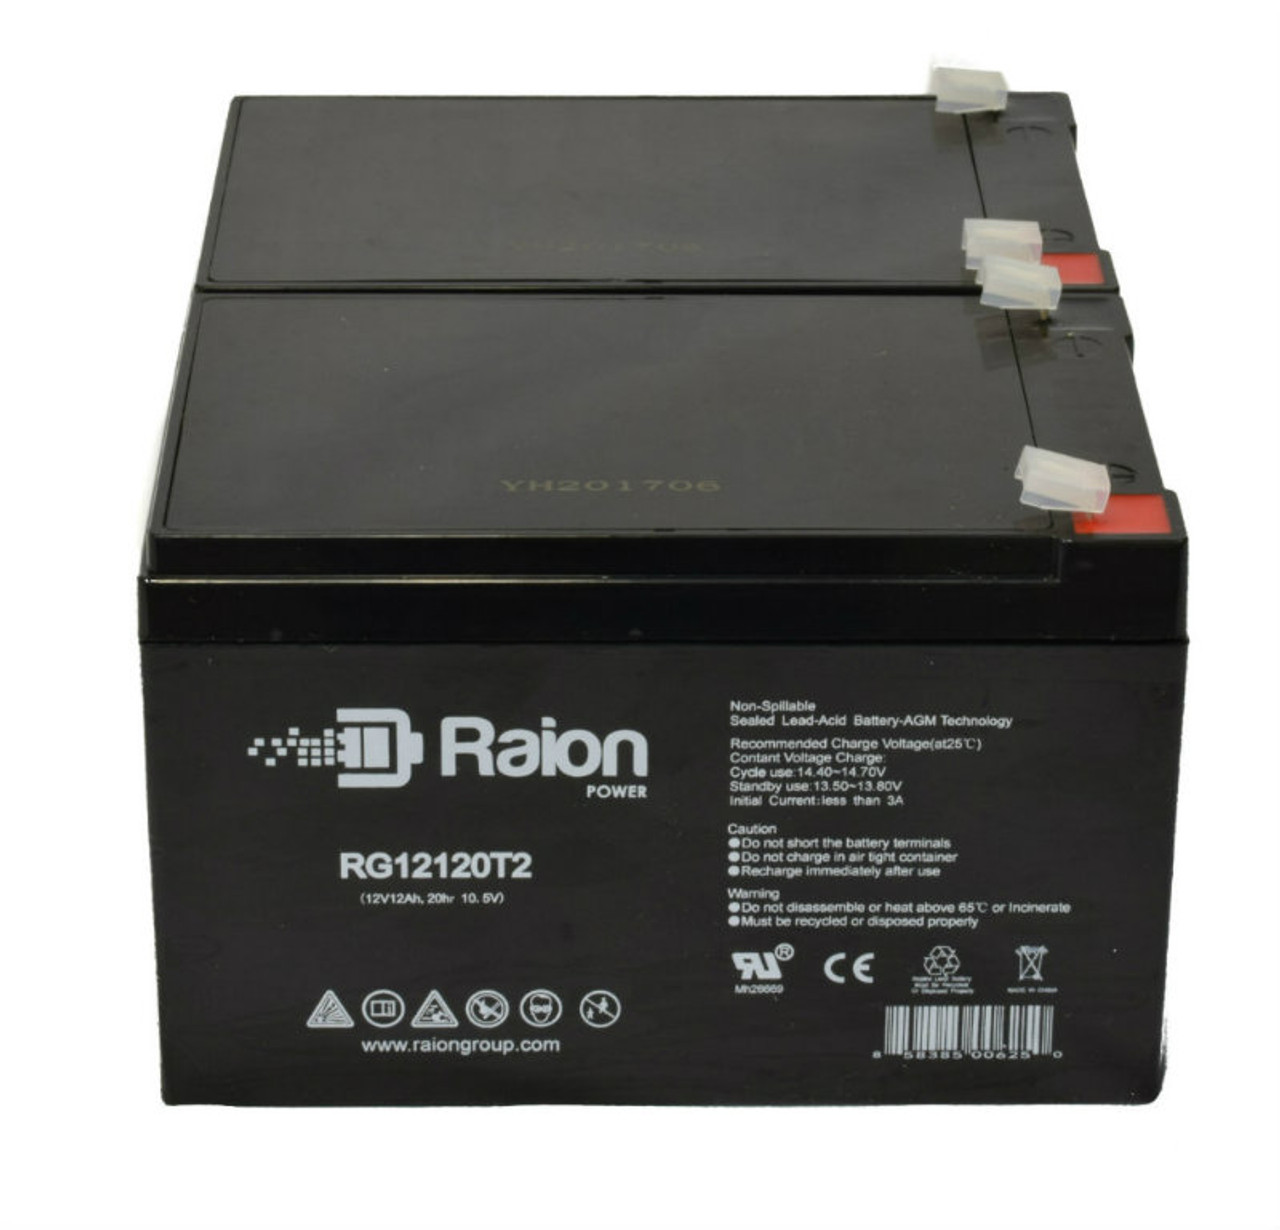 Raion Power 12V 12Ah Non-Spillable Compatible Replacement Battery for Zonne Energy FP12120D - (2 Pack)